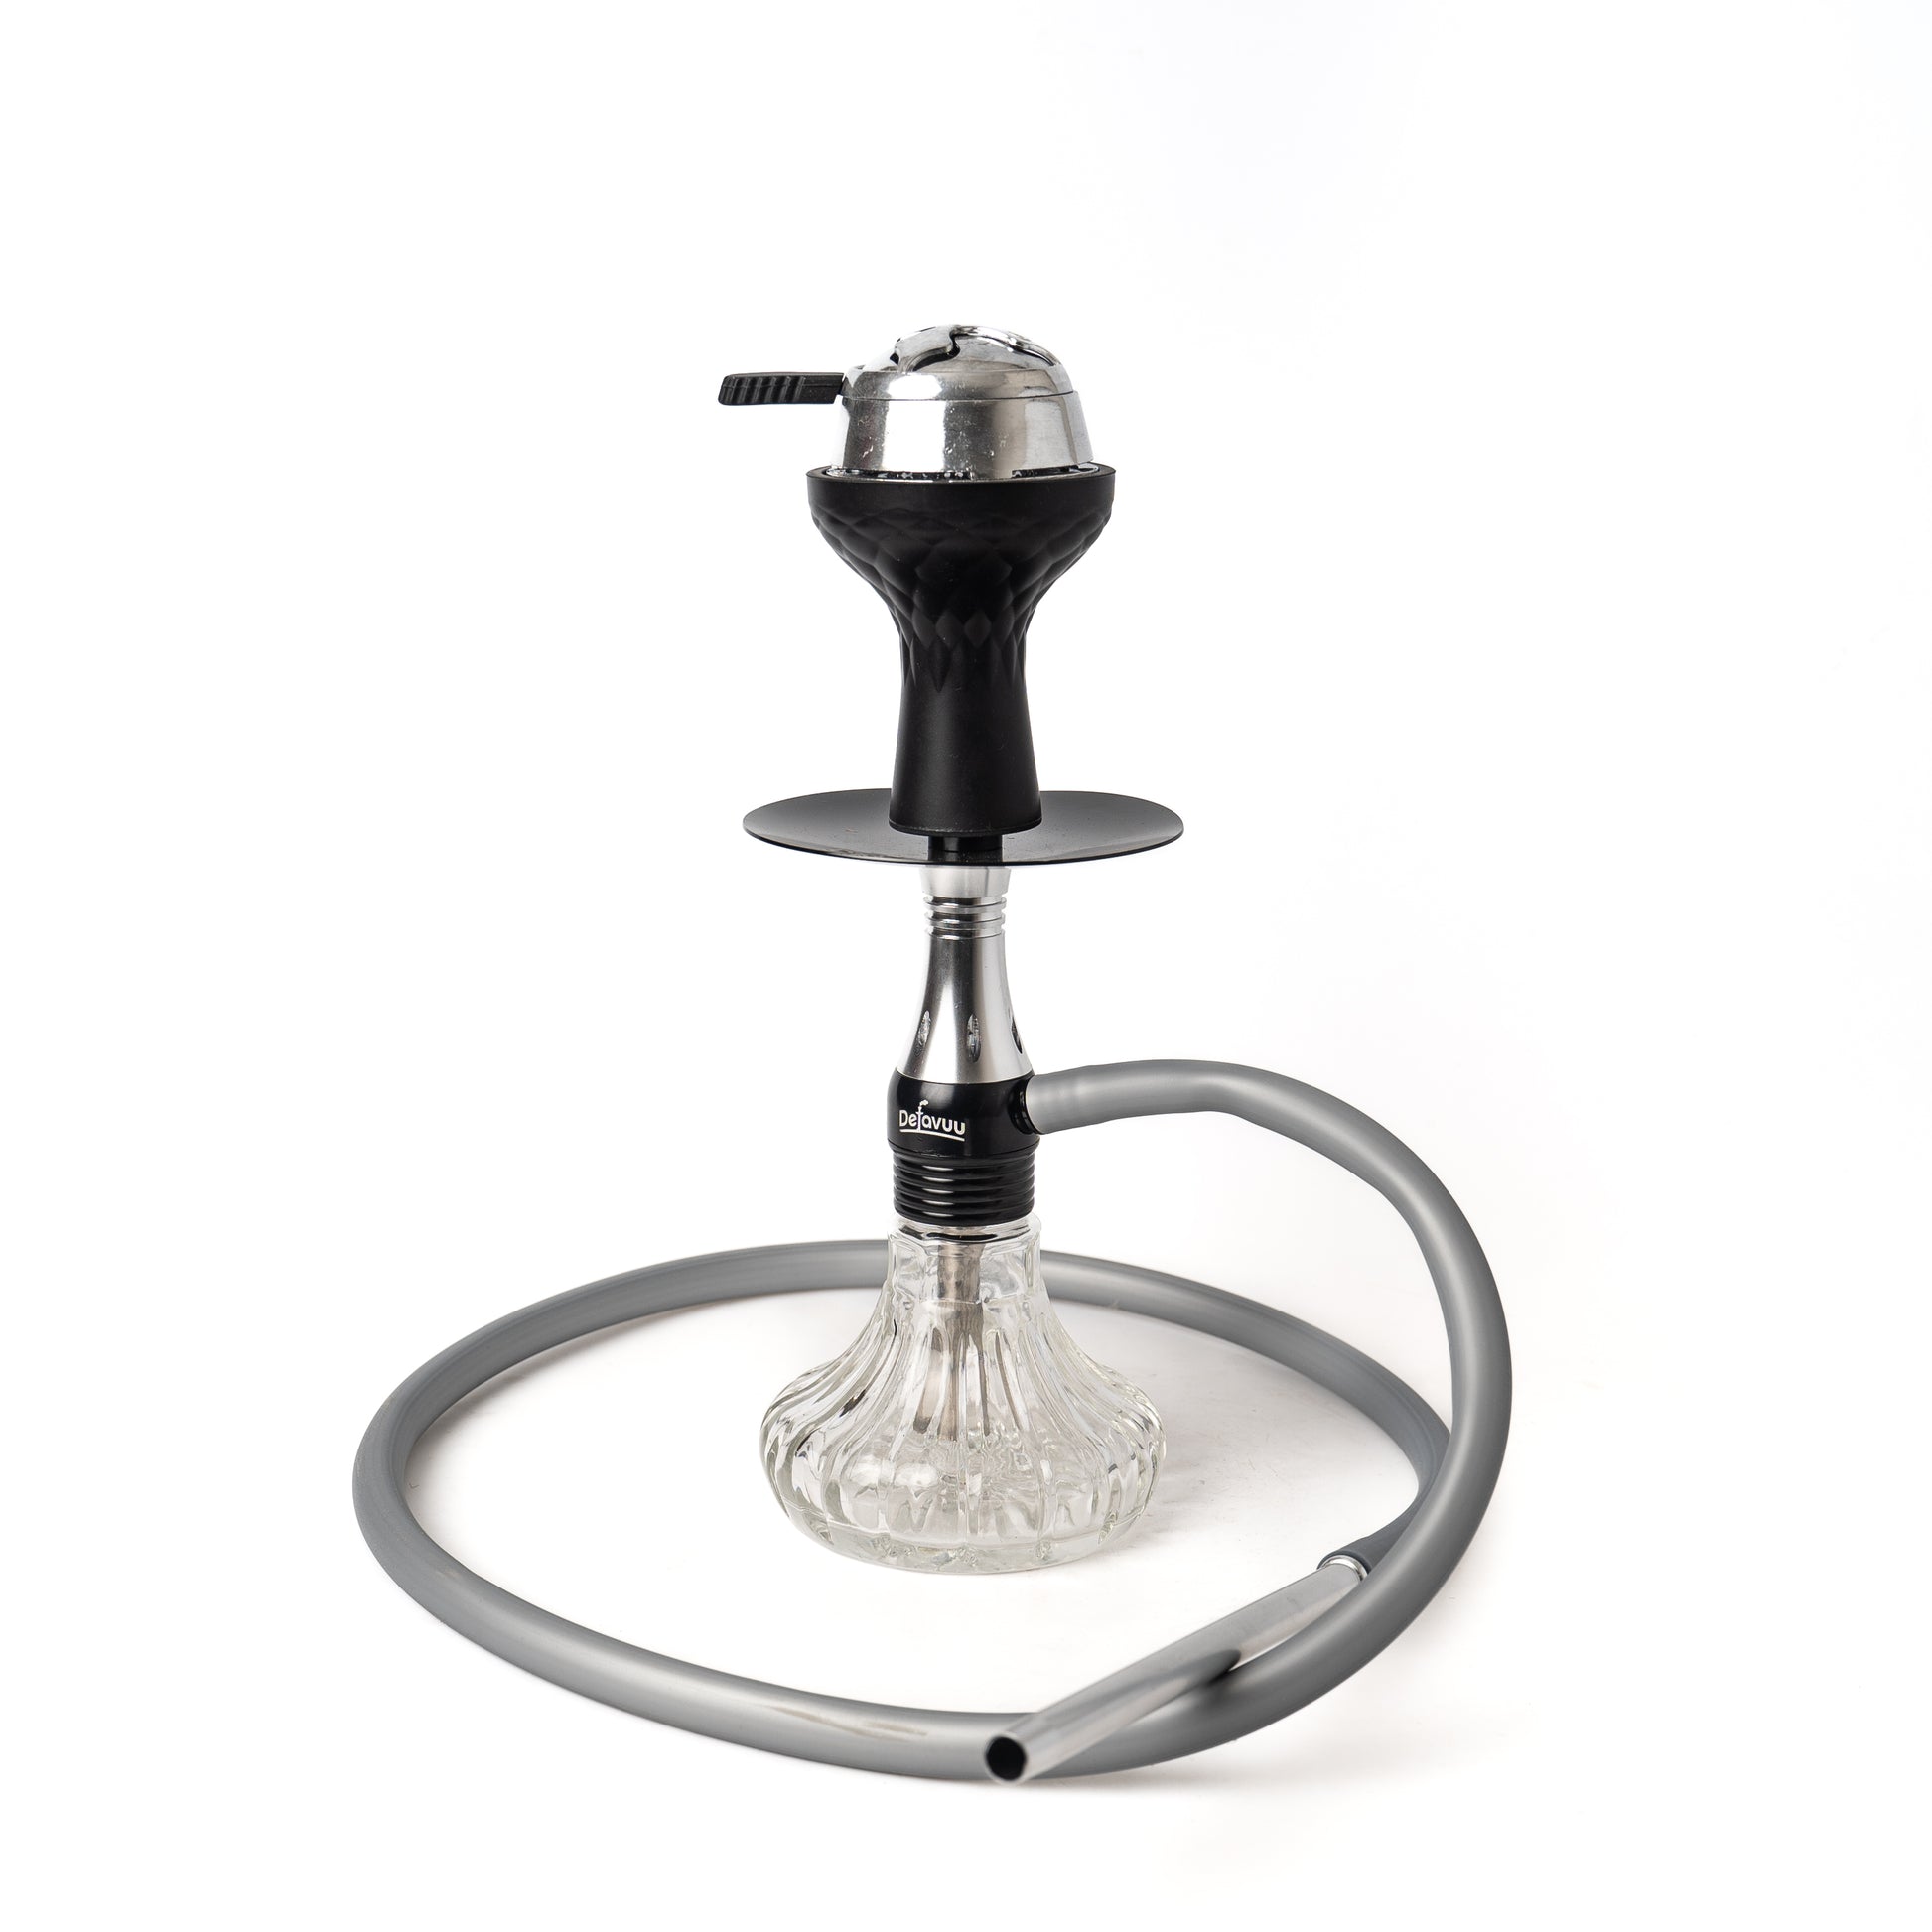 Miniature X Hookah with Travel Bag - Silver